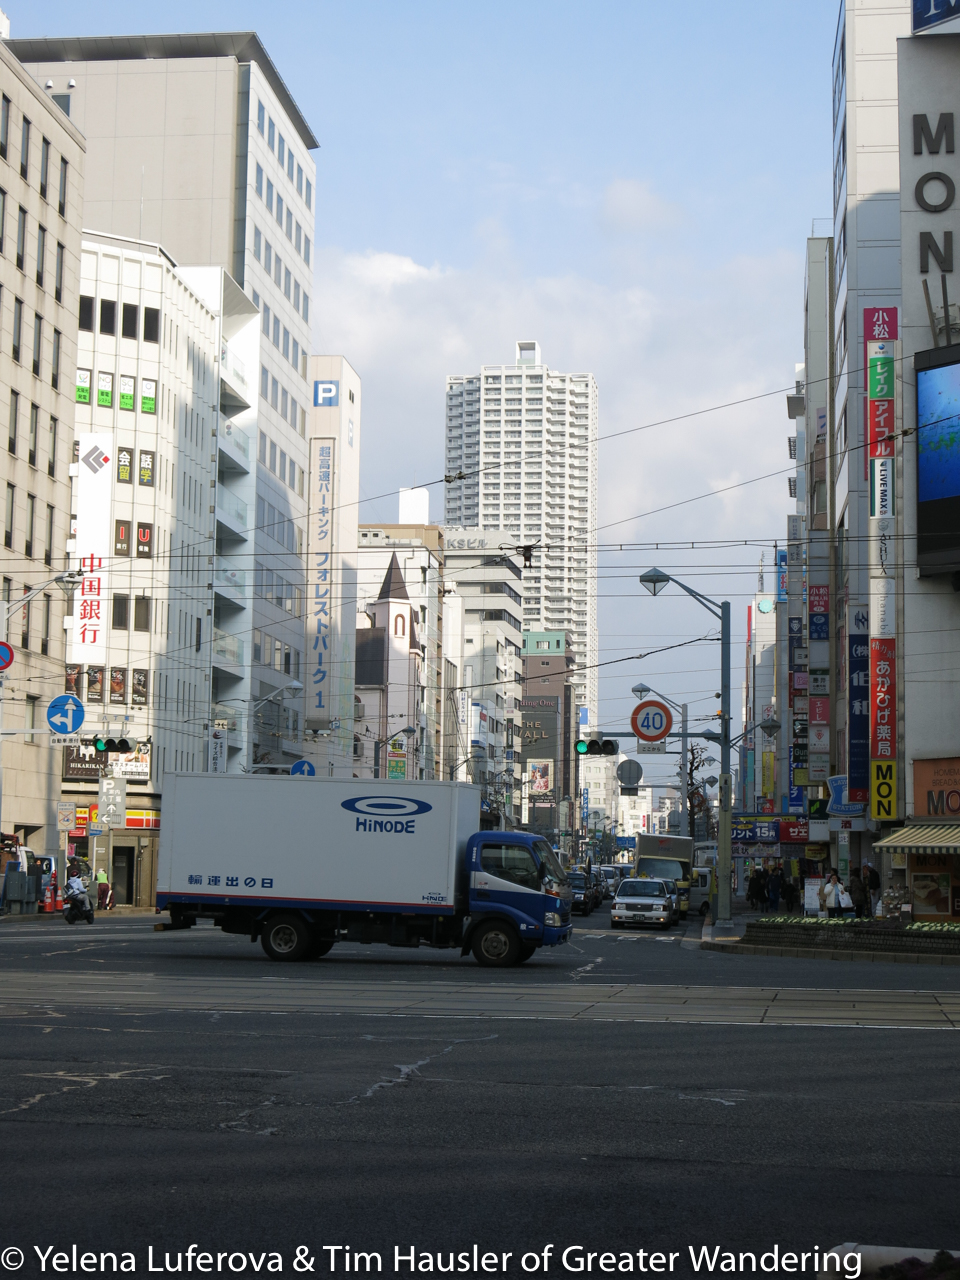 Morning on the streets of Hiroshima